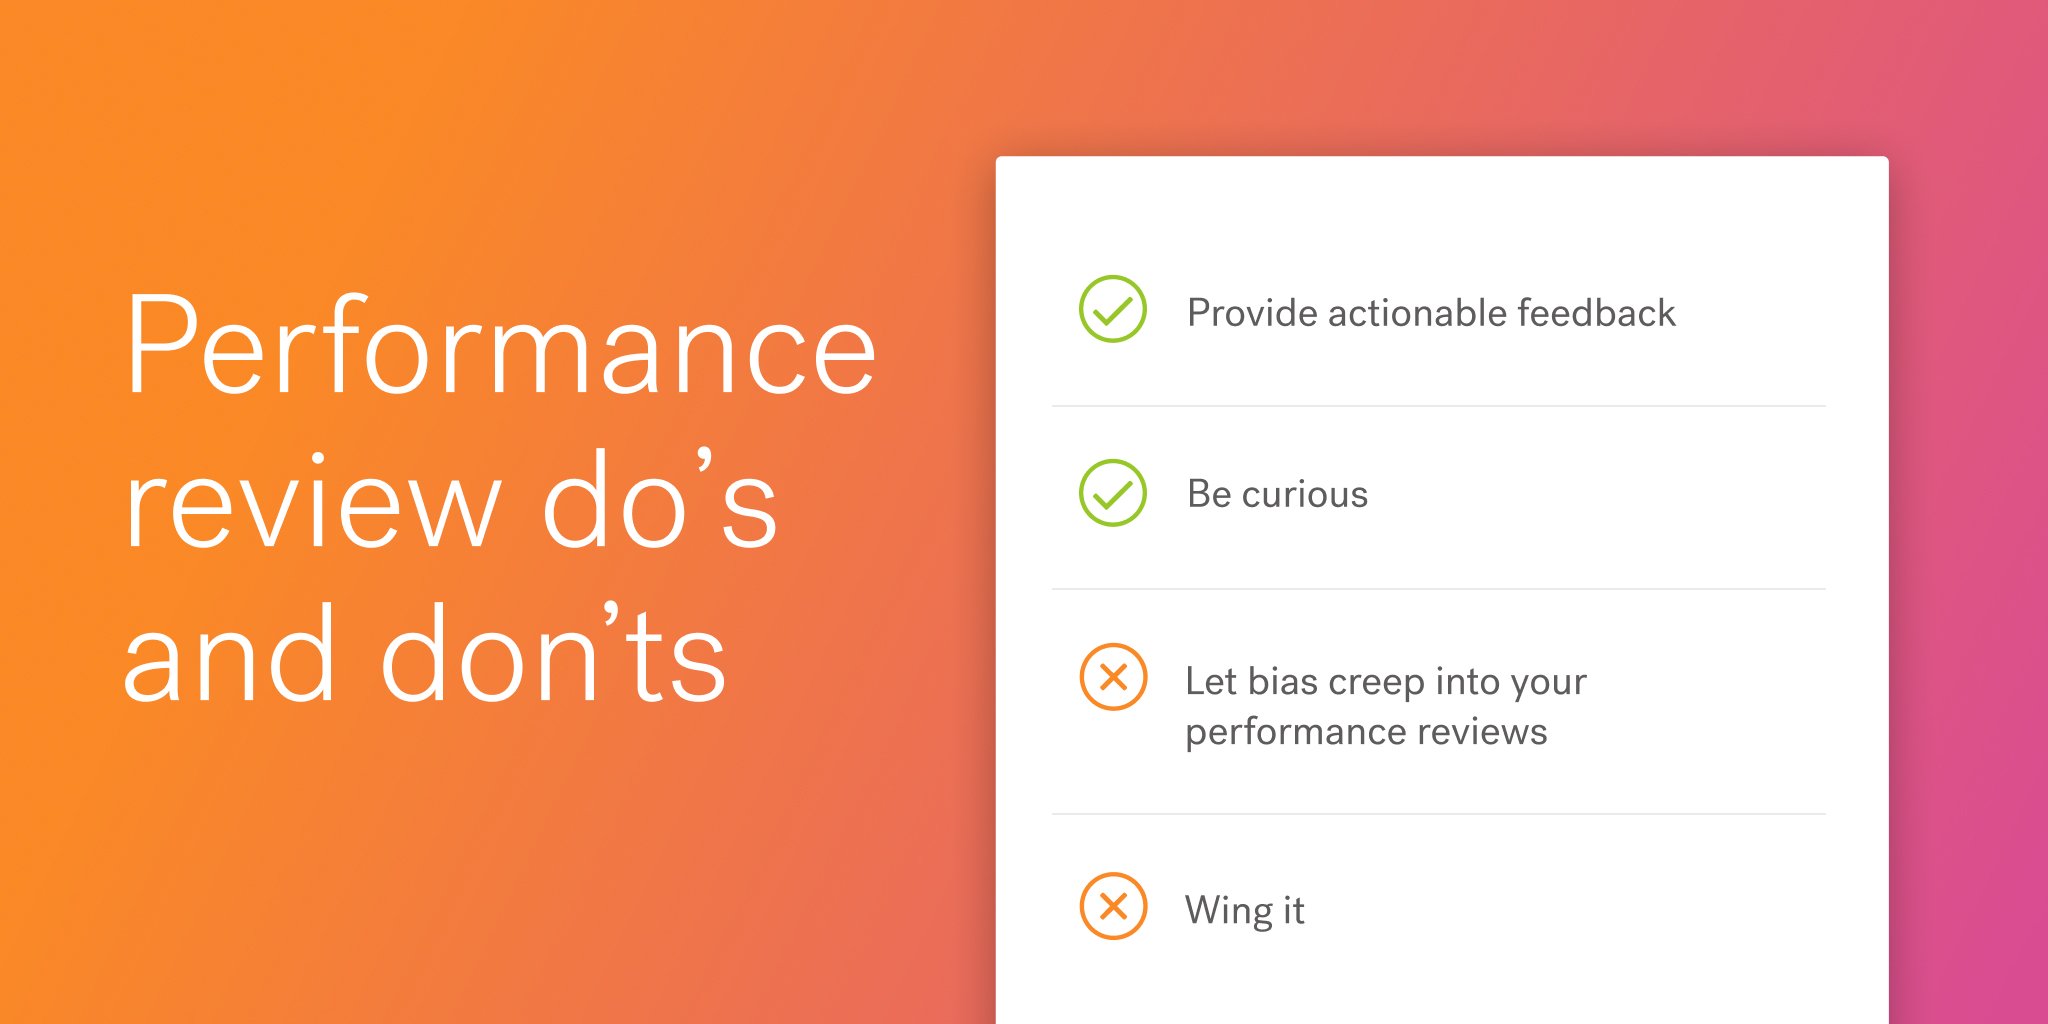 Performance review do